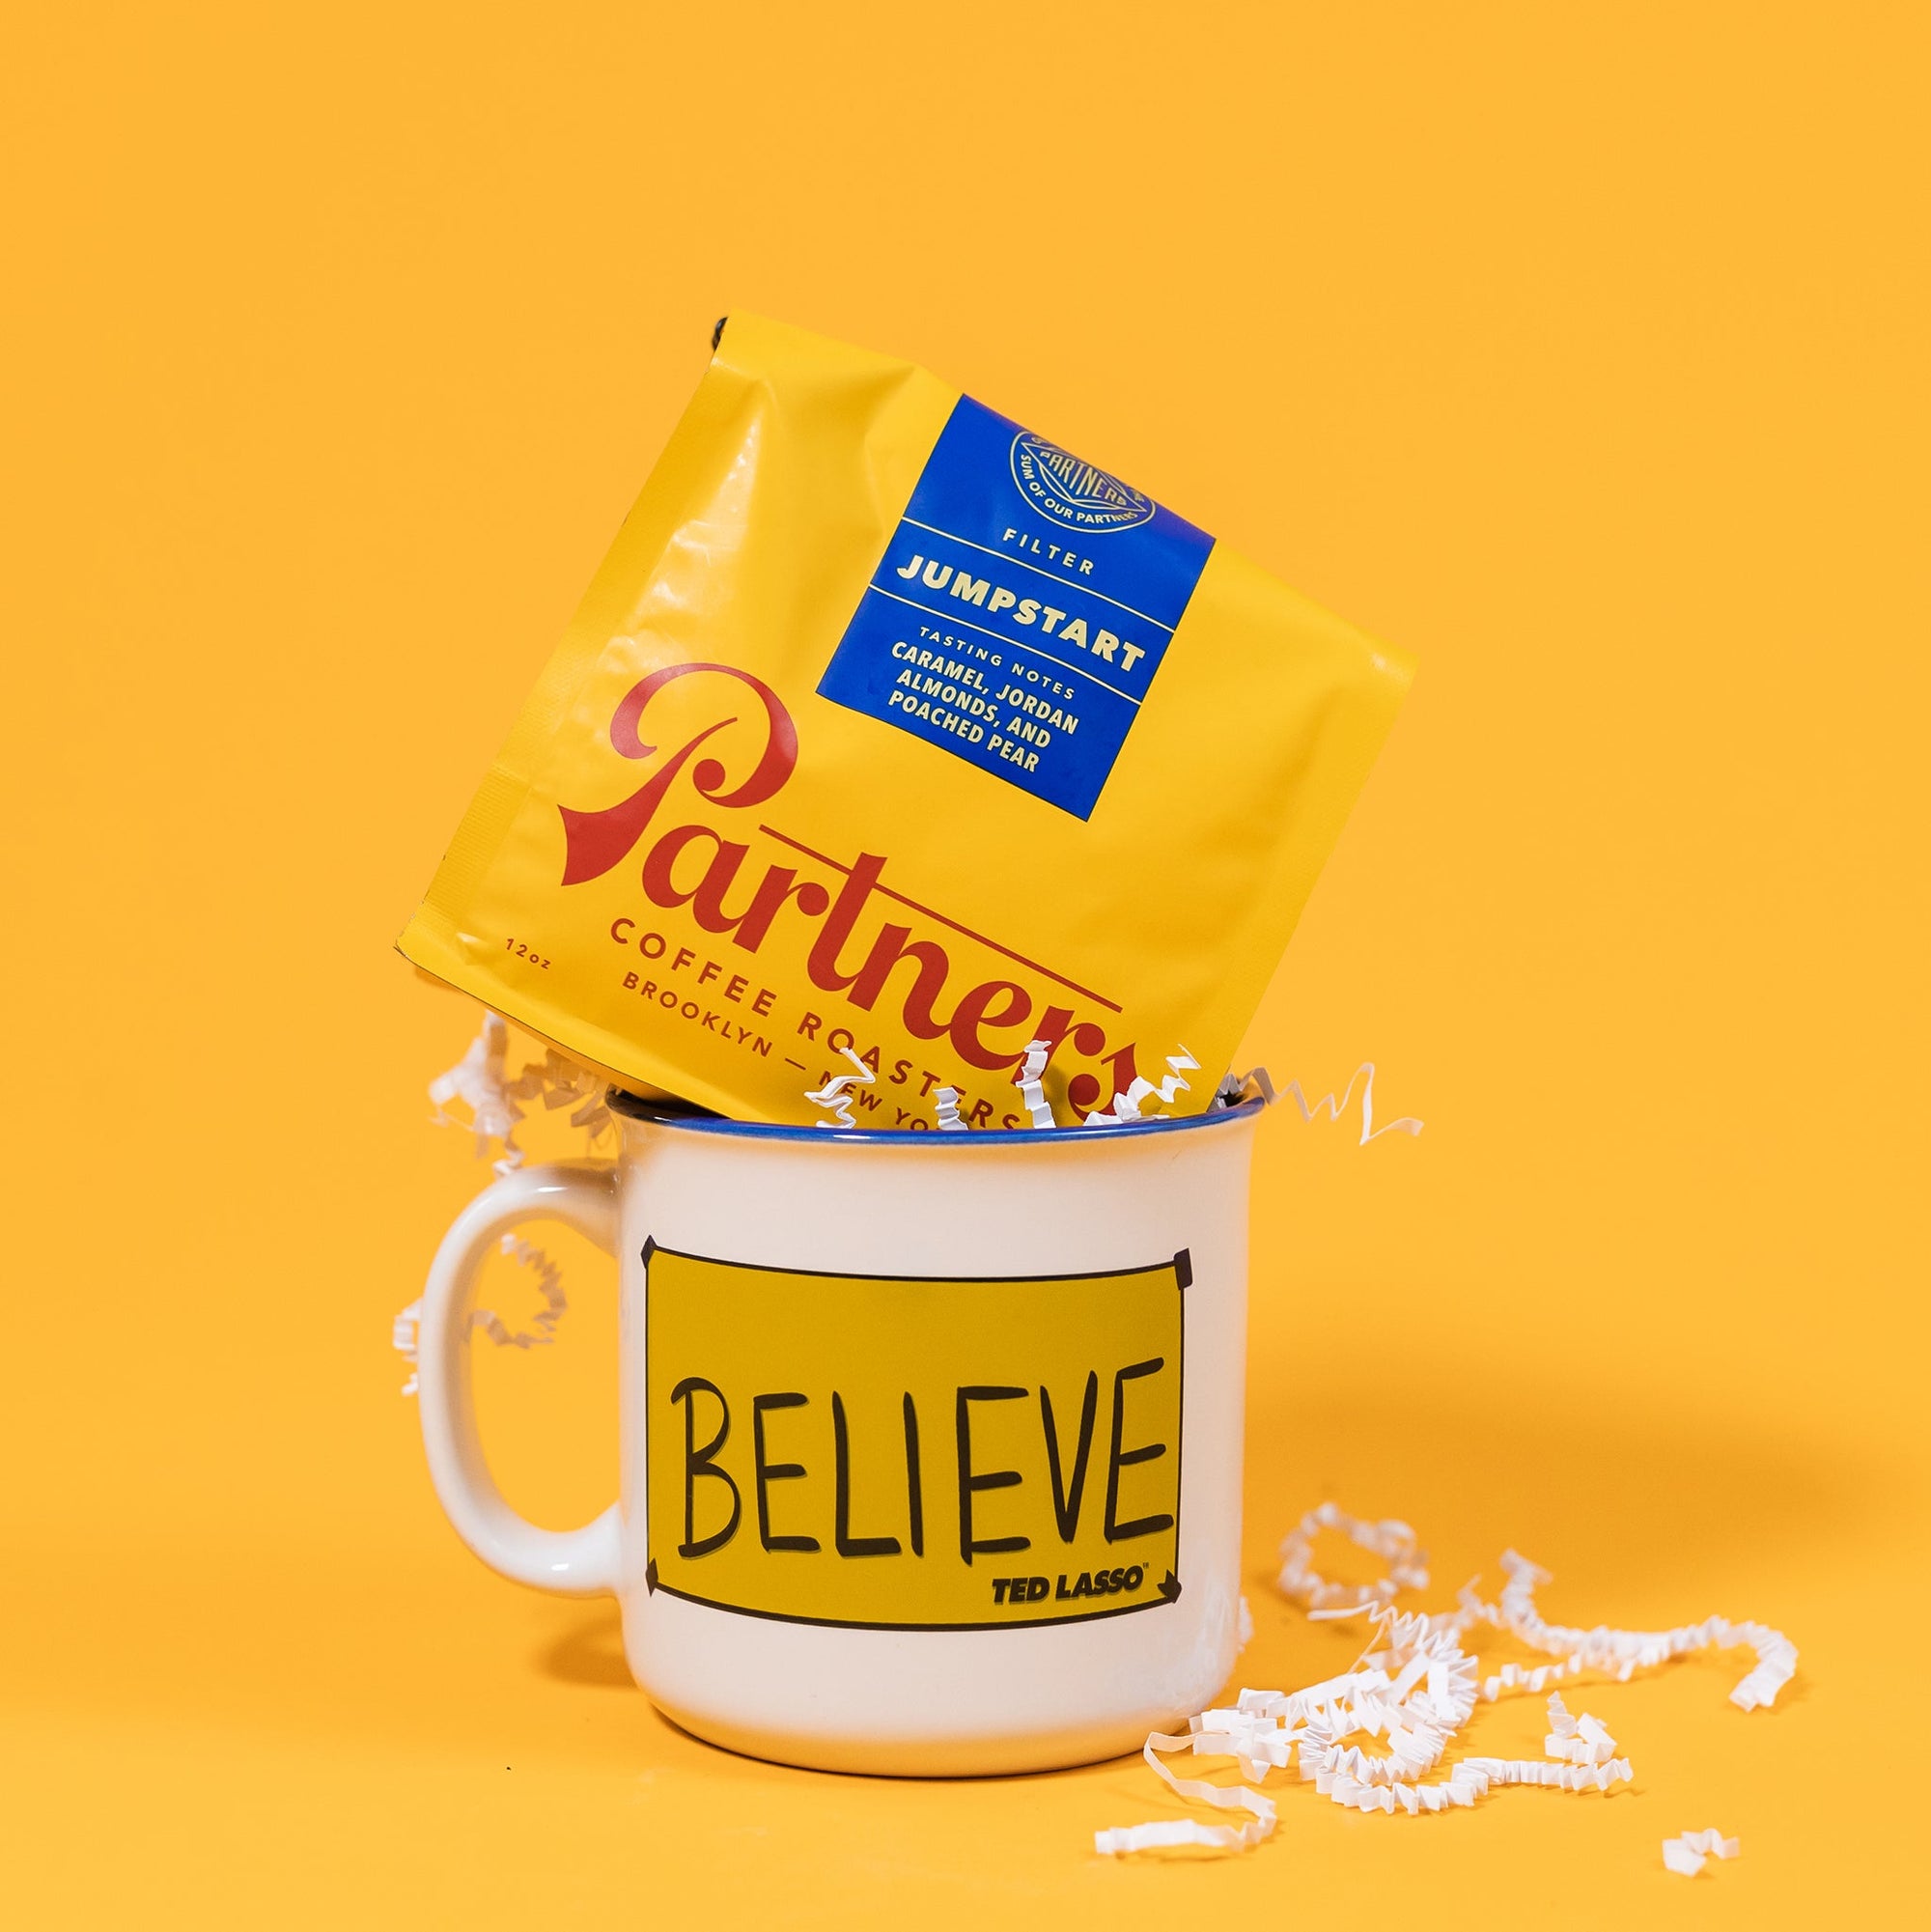 On a mustard yellow background sits a mug and a bag of coffee. The yellow bag of Partners coffee sits jauntily atop the mug. The mug is a white campfire style mug lined in Blue with a yellow "Believe" sign from the hit show Ted Lasso. It's filled with white crinkle.